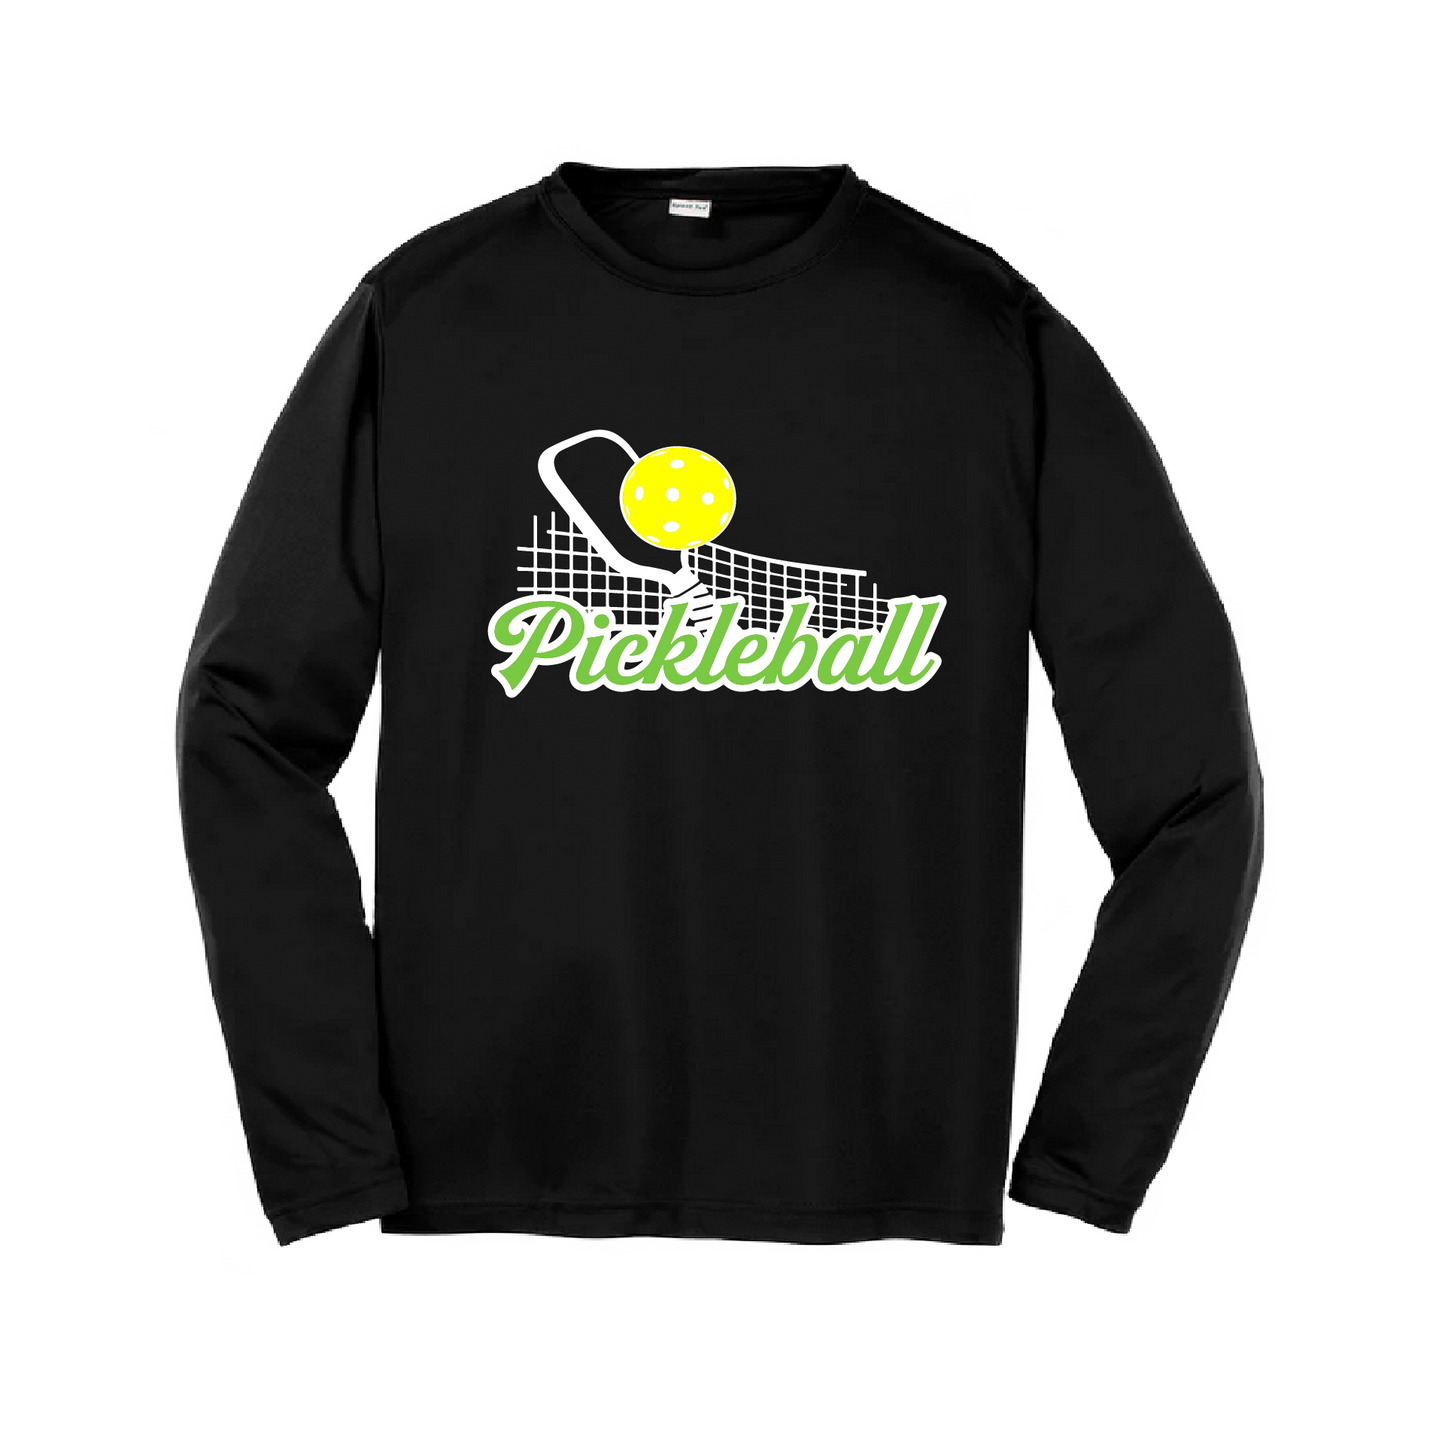 Pickleball Design: Paddle with Net  Youth Style: Long Sleeve  Shirts are lightweight, roomy and highly breathable. These moisture-wicking shirts are designed for athletic performance. They feature PosiCharge technology to lock in color and prevent logos from fading. Removable tag and set-in sleeves for comfort.